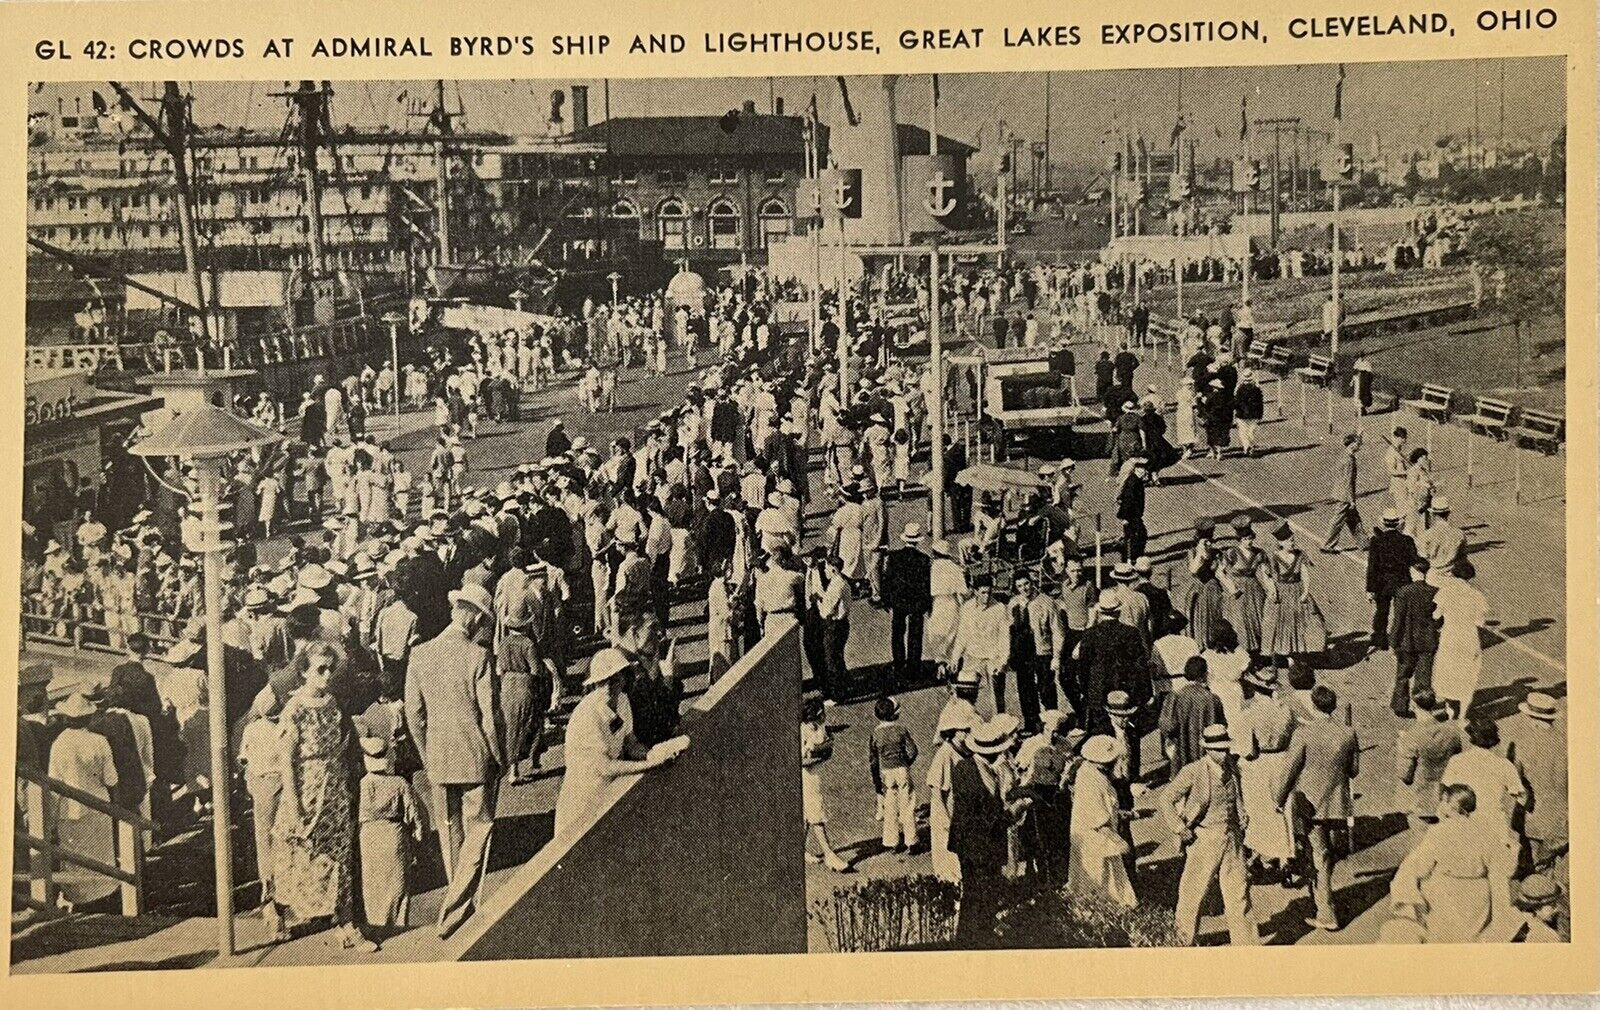 Great Lakes Exposition Cleveland 1936-37 Admiral Bird’s Ship & Lighthouse